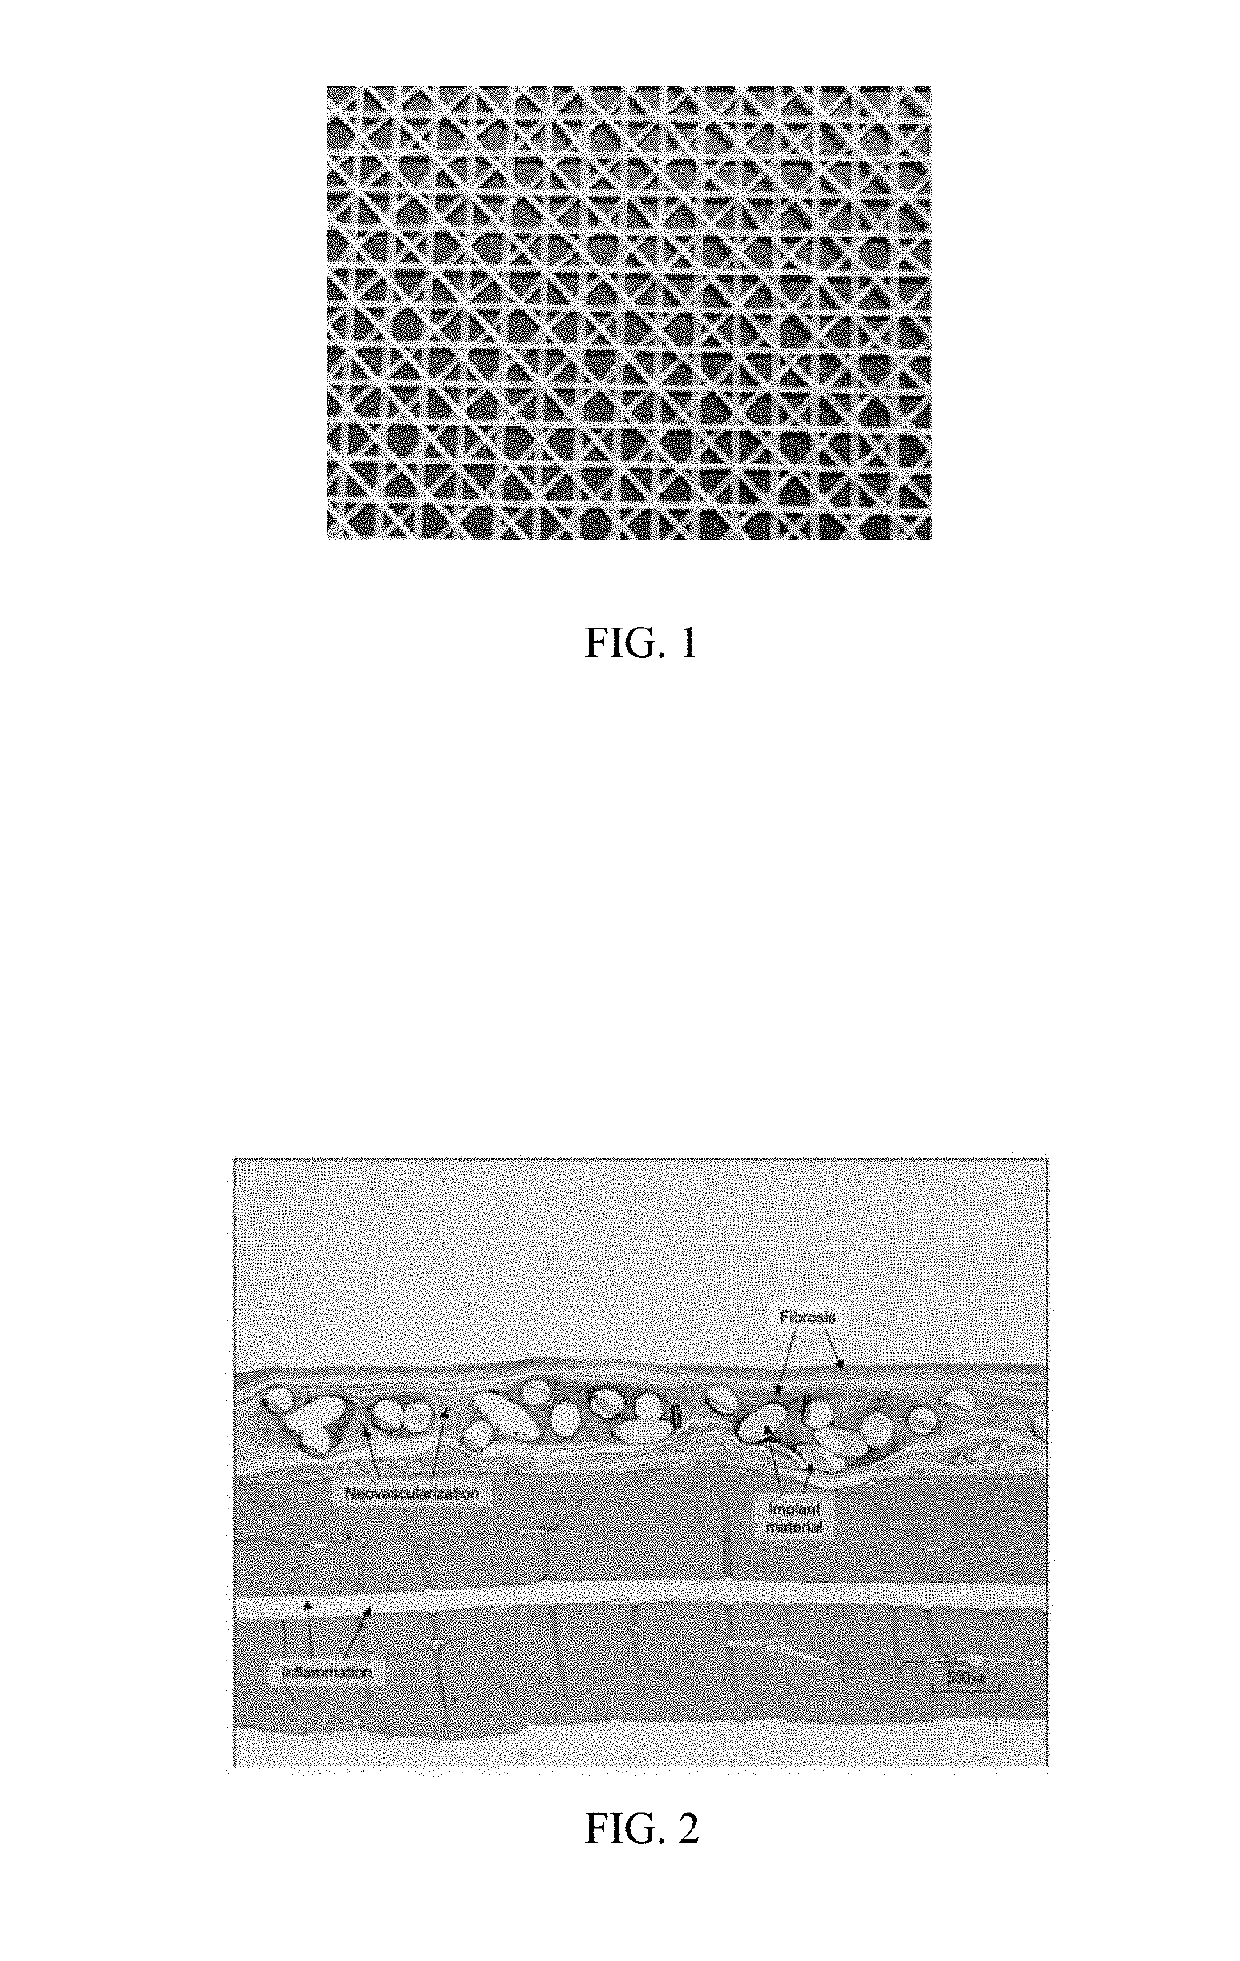 Hernia repair, breast reconstruction and sling devices containing poly(butylene succinate) and copolymers thereof